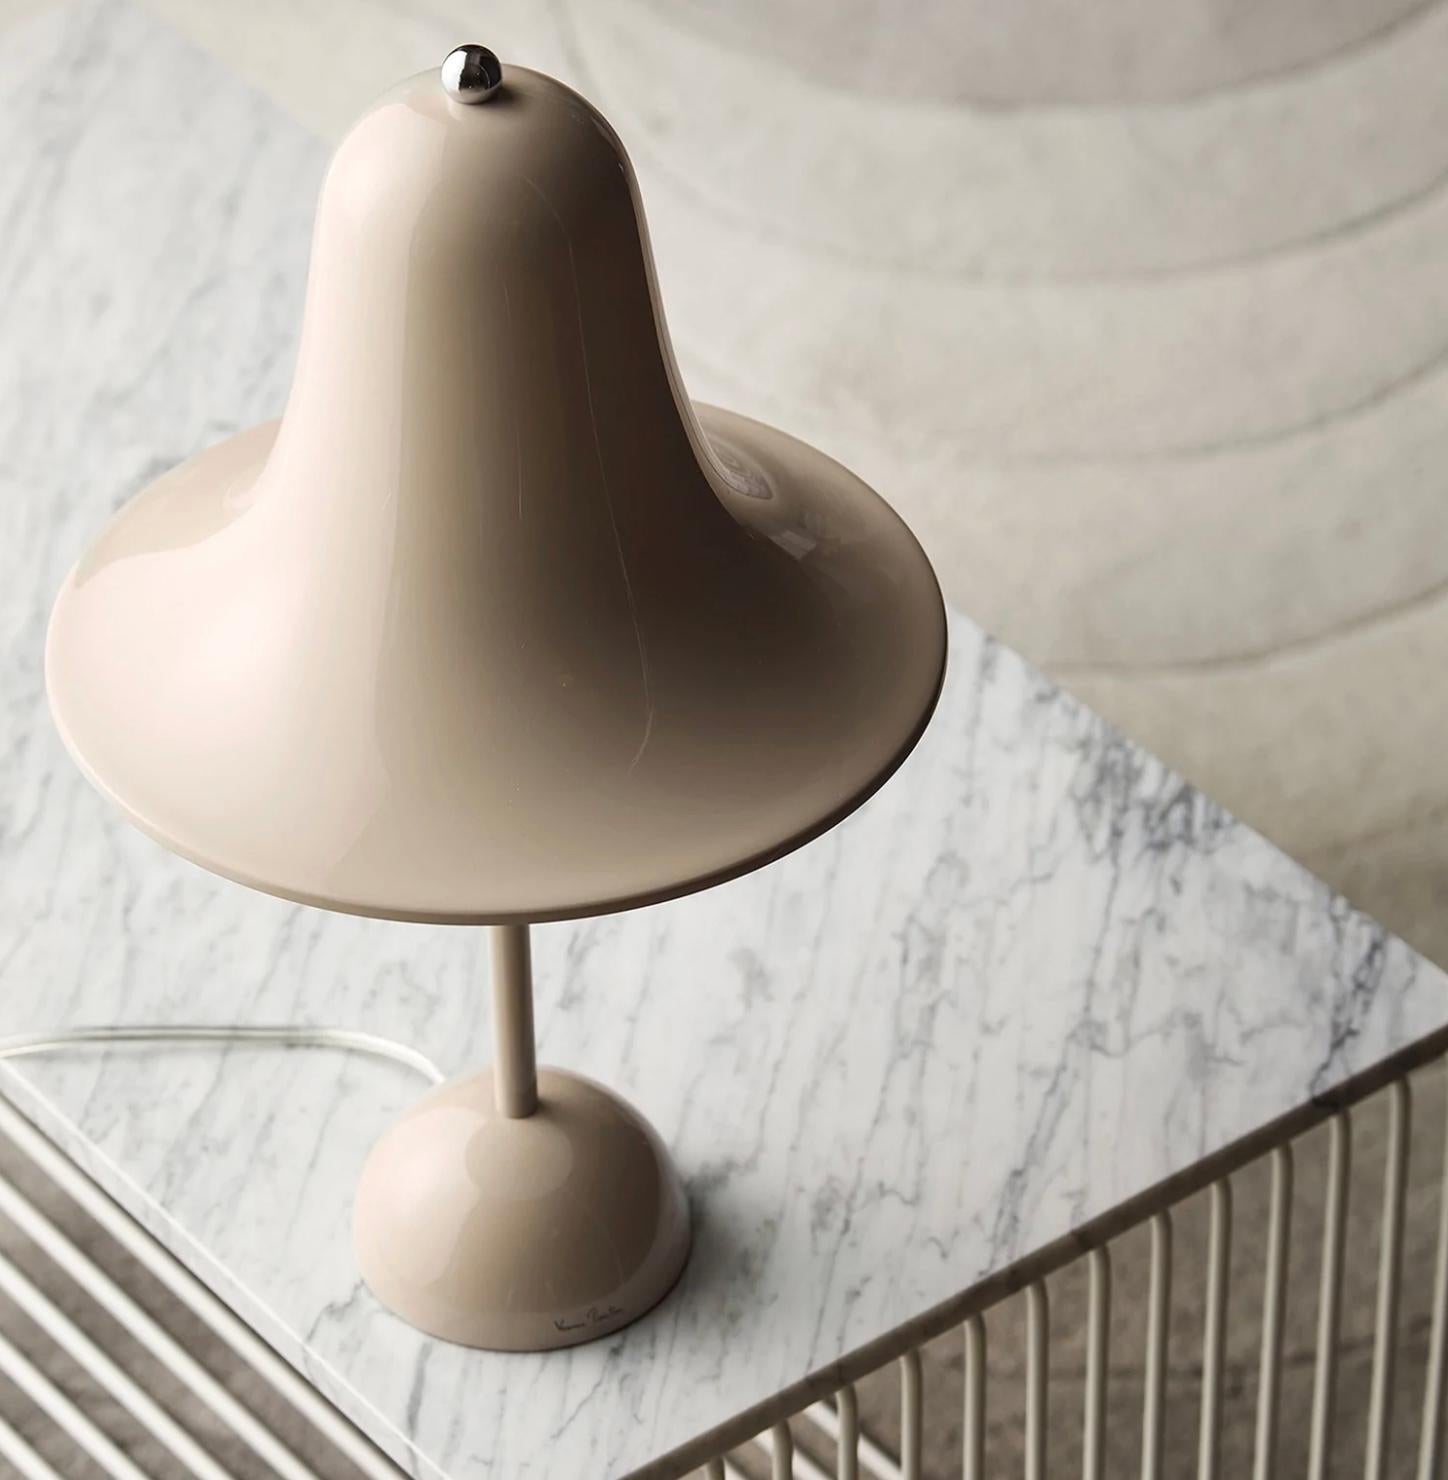 Verner Panton 'Pantop' table lamp in 'Grey Sand' for Verpan. Designed in 1980. New, current production.

The elegant Pantop line was designed by Verner Panton in 1980, and has for a long time been a staple of the Verpan collection. Pantop is